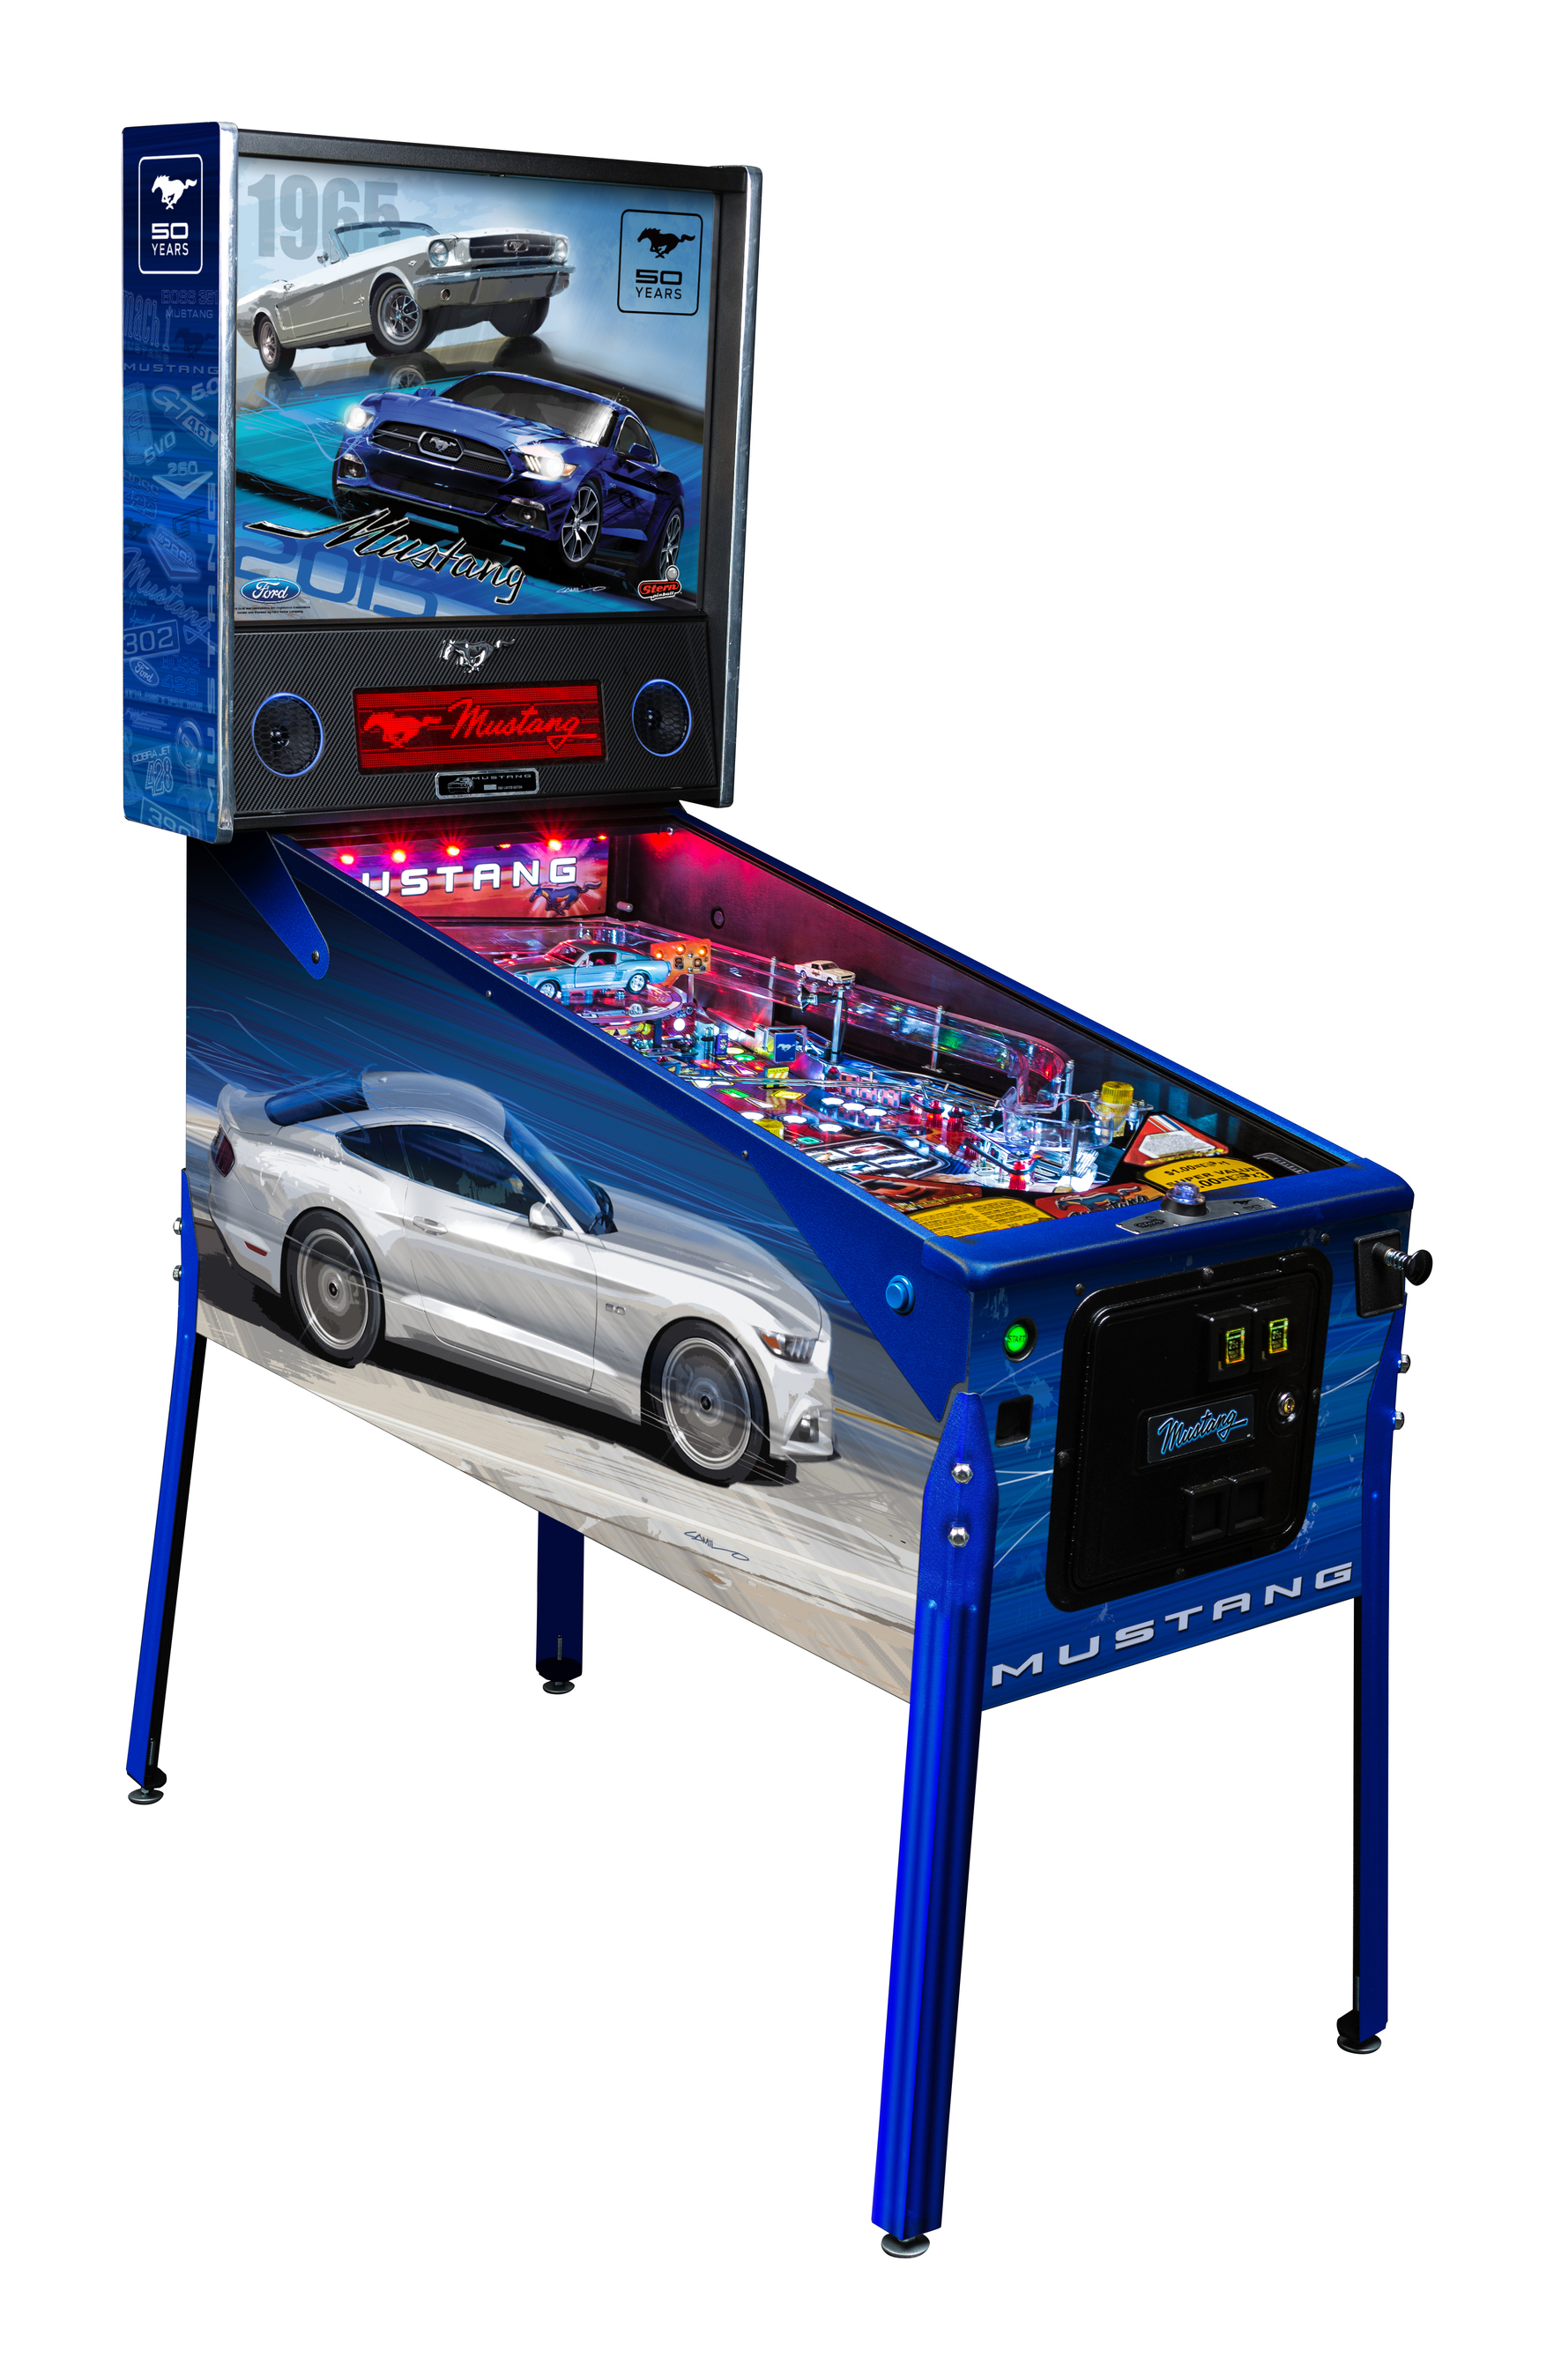 Stern Pinball Unveils "Top Secret" Images of the 50-Years-of-Mustang Limited Edition: The "50 Years" LE joins Stern's Boss Mustang Premium and Mustang Pro models to complete the Mustang Pinball line.  (PRNewsFoto/Stern Pinball, Inc.)